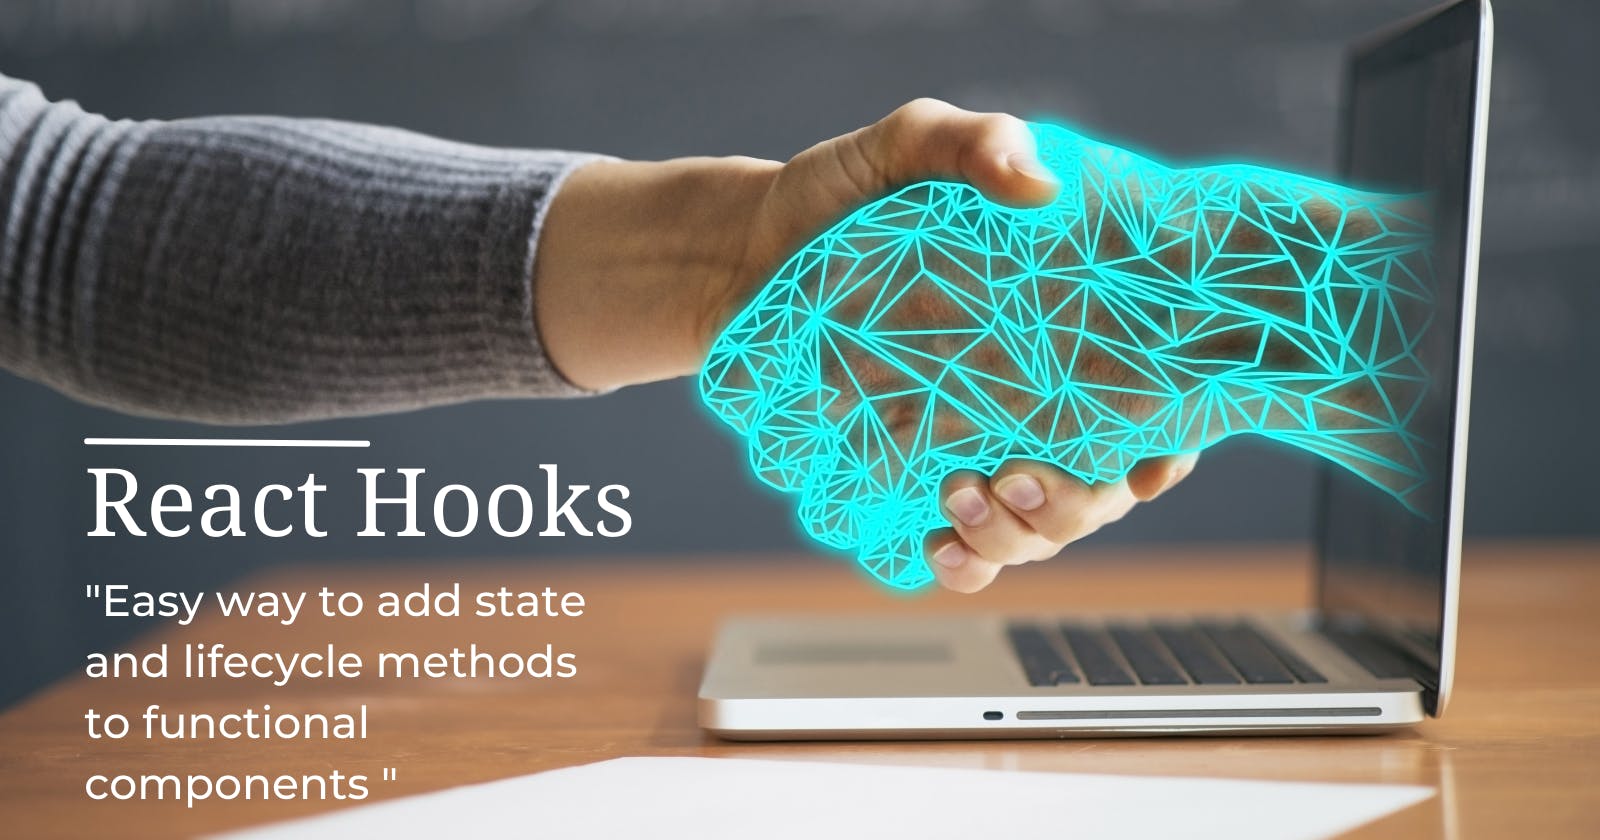 React Hooks: Hooks provide an easy way to add state and lifecycle methods to functional components